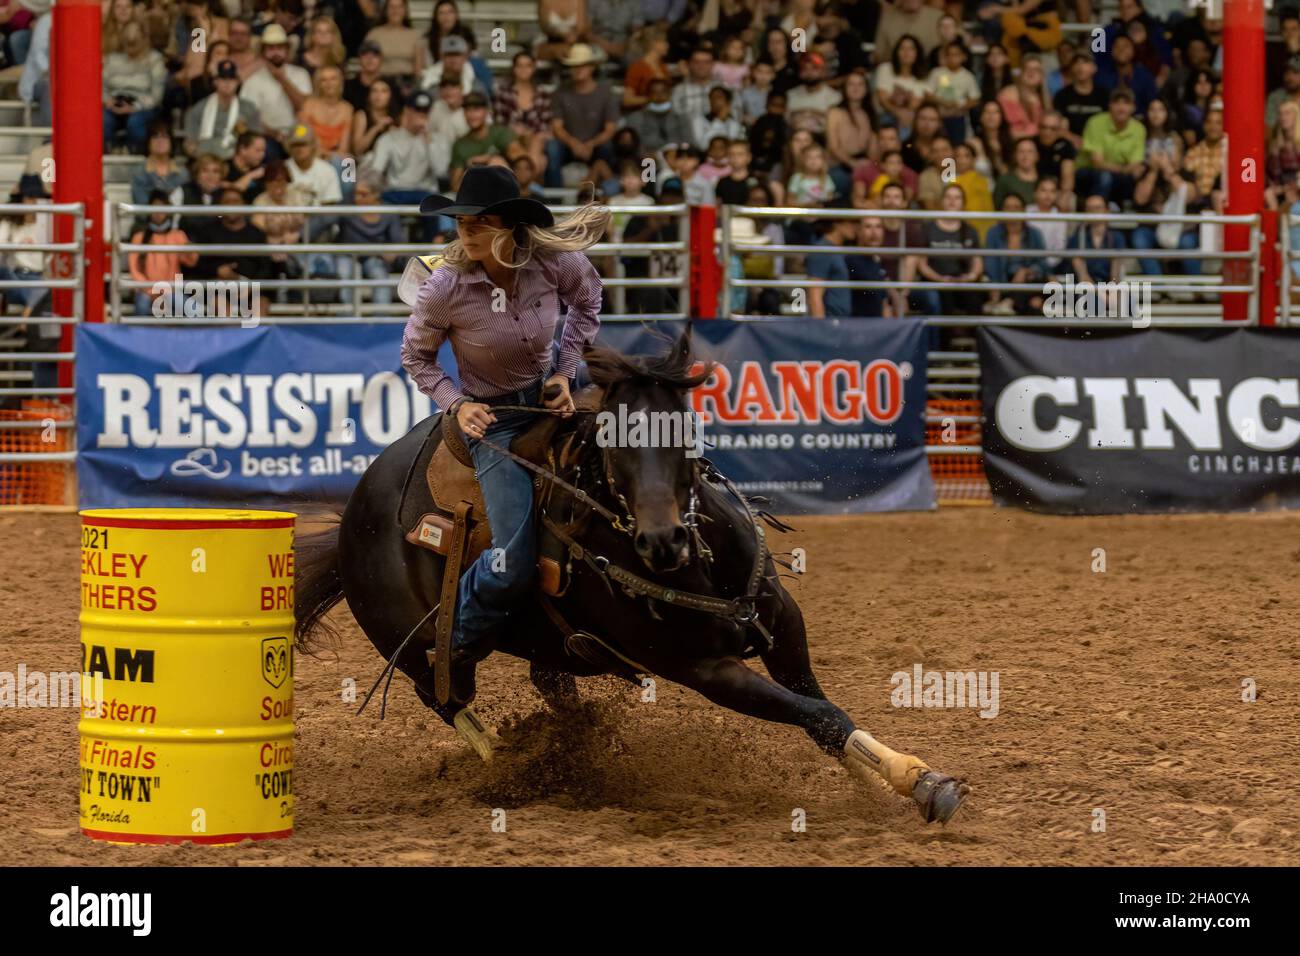 Barrel Racing seen on Southeastern Circuit Finals Rodeo during the event. Stock Photo